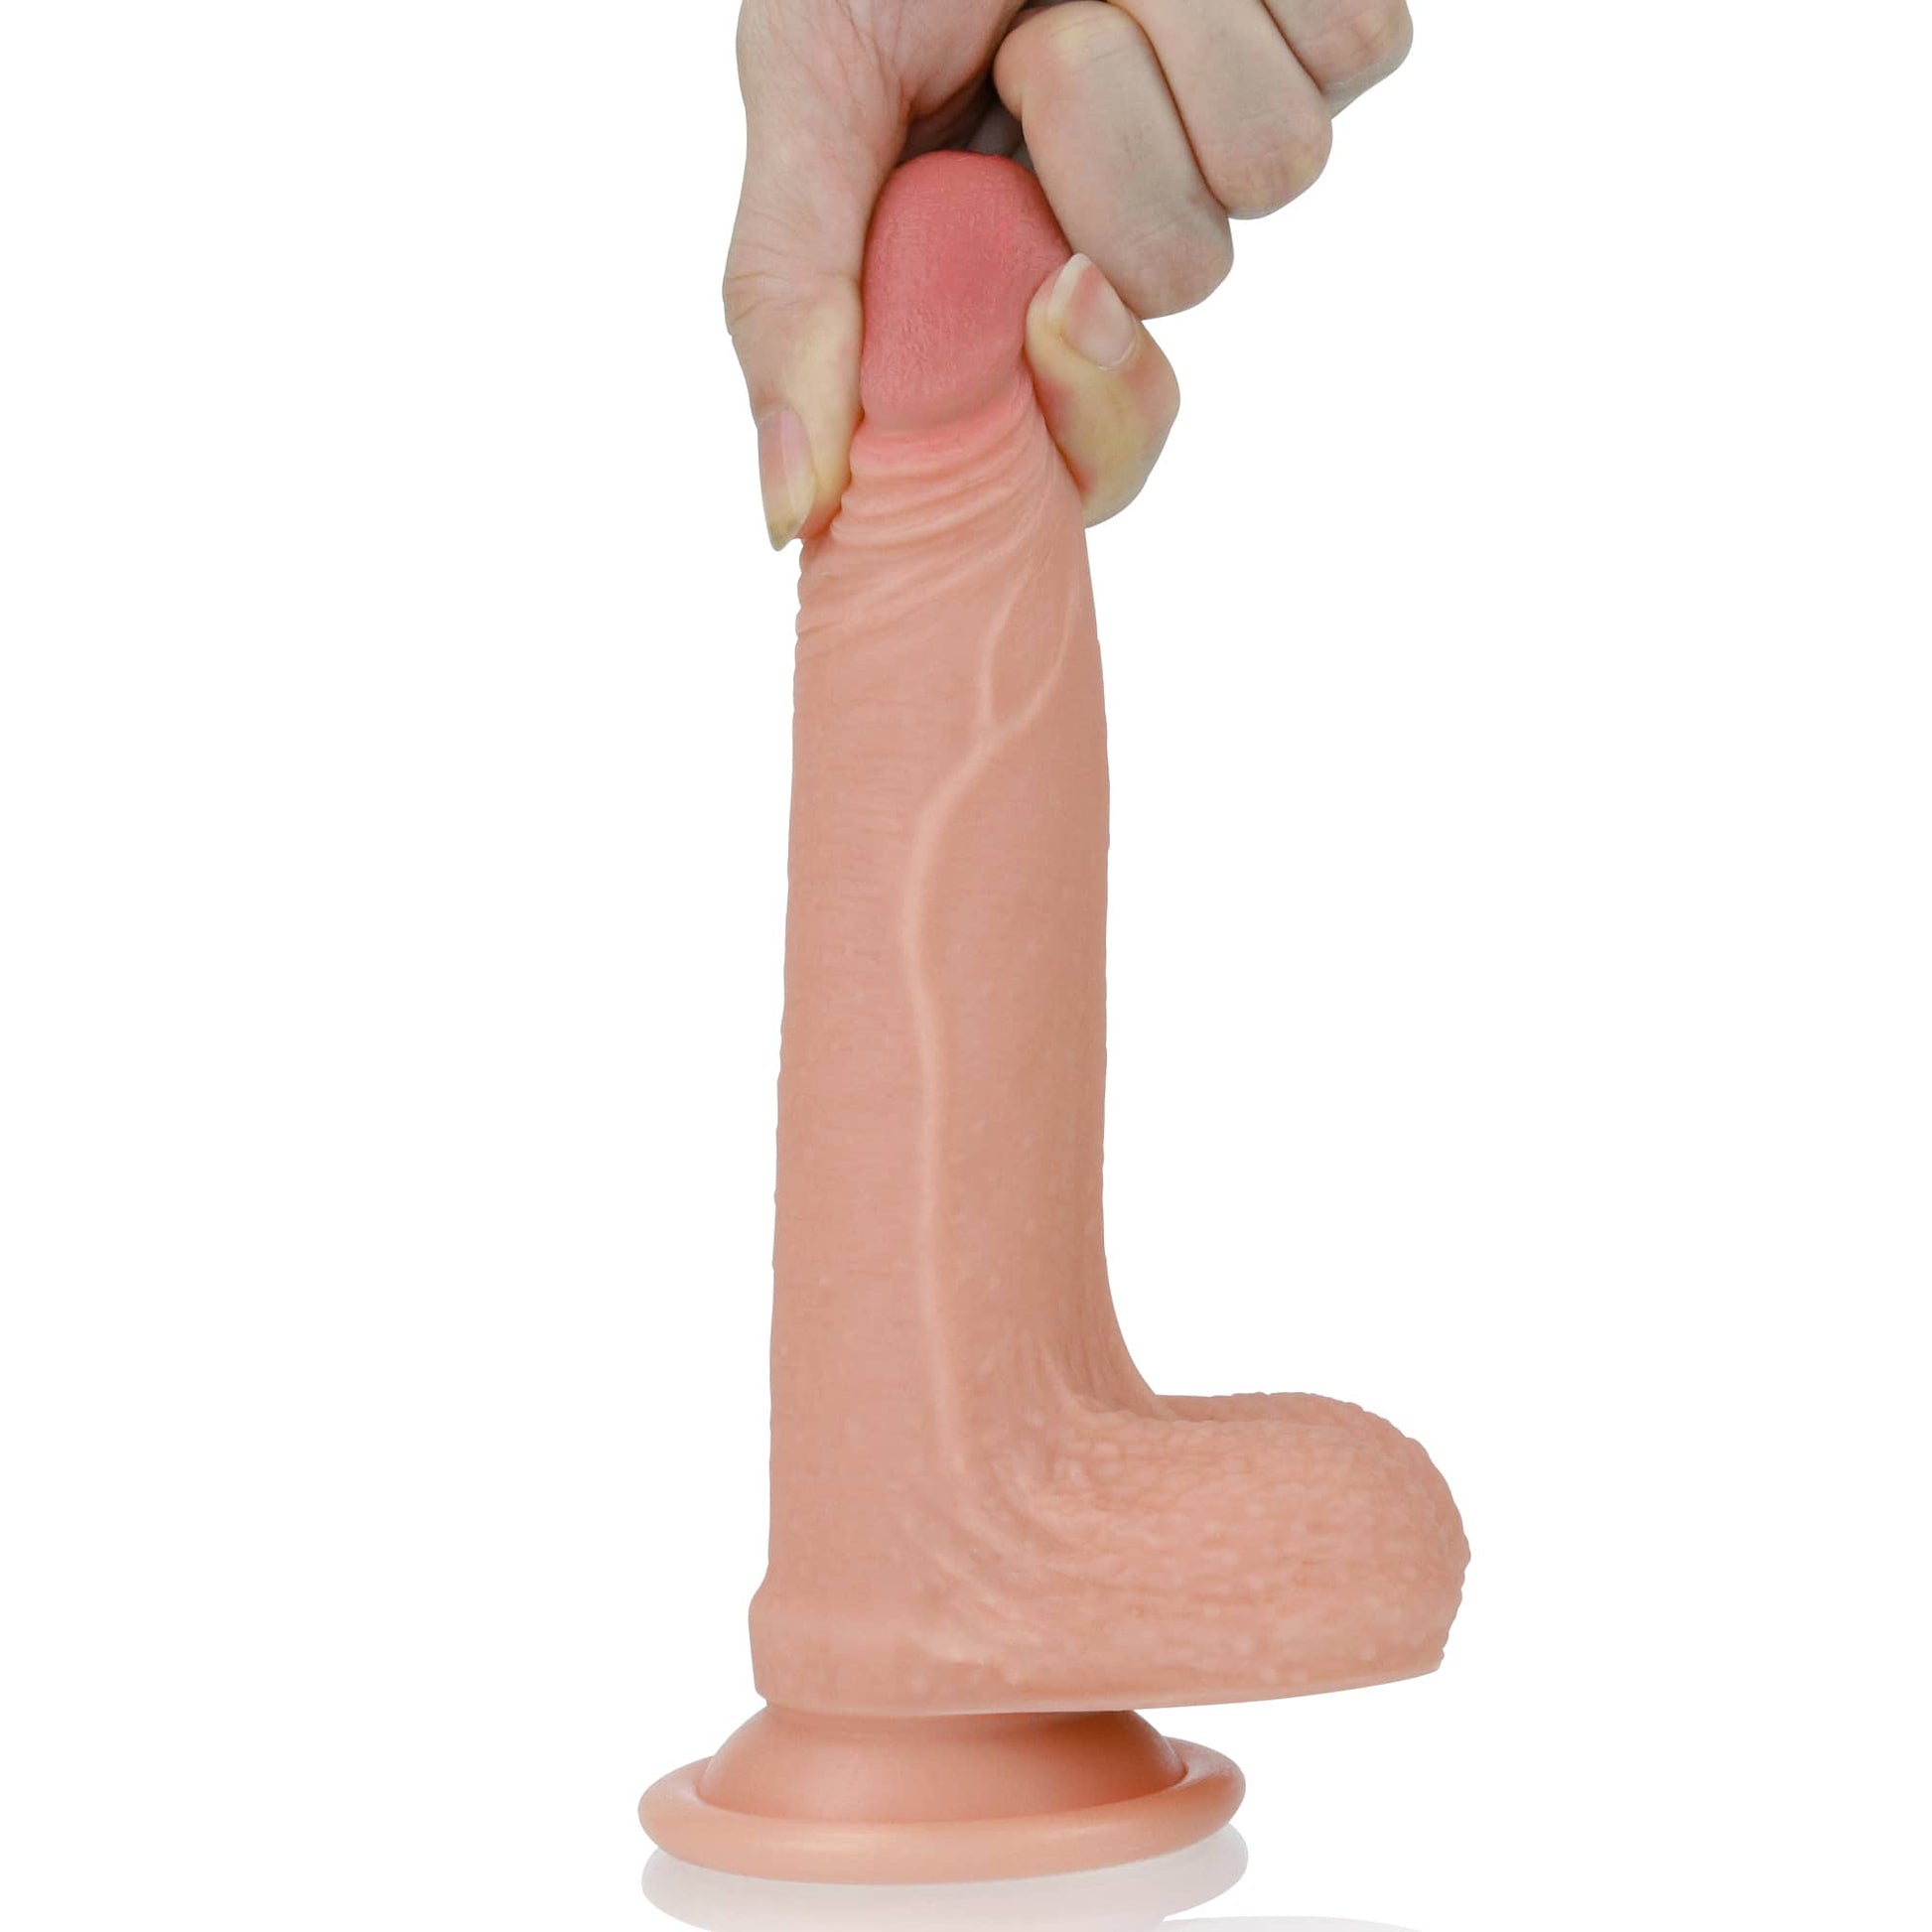 The 7 inches dual layered silicone flesh dildo is firmly attached to the floor with its suction cup